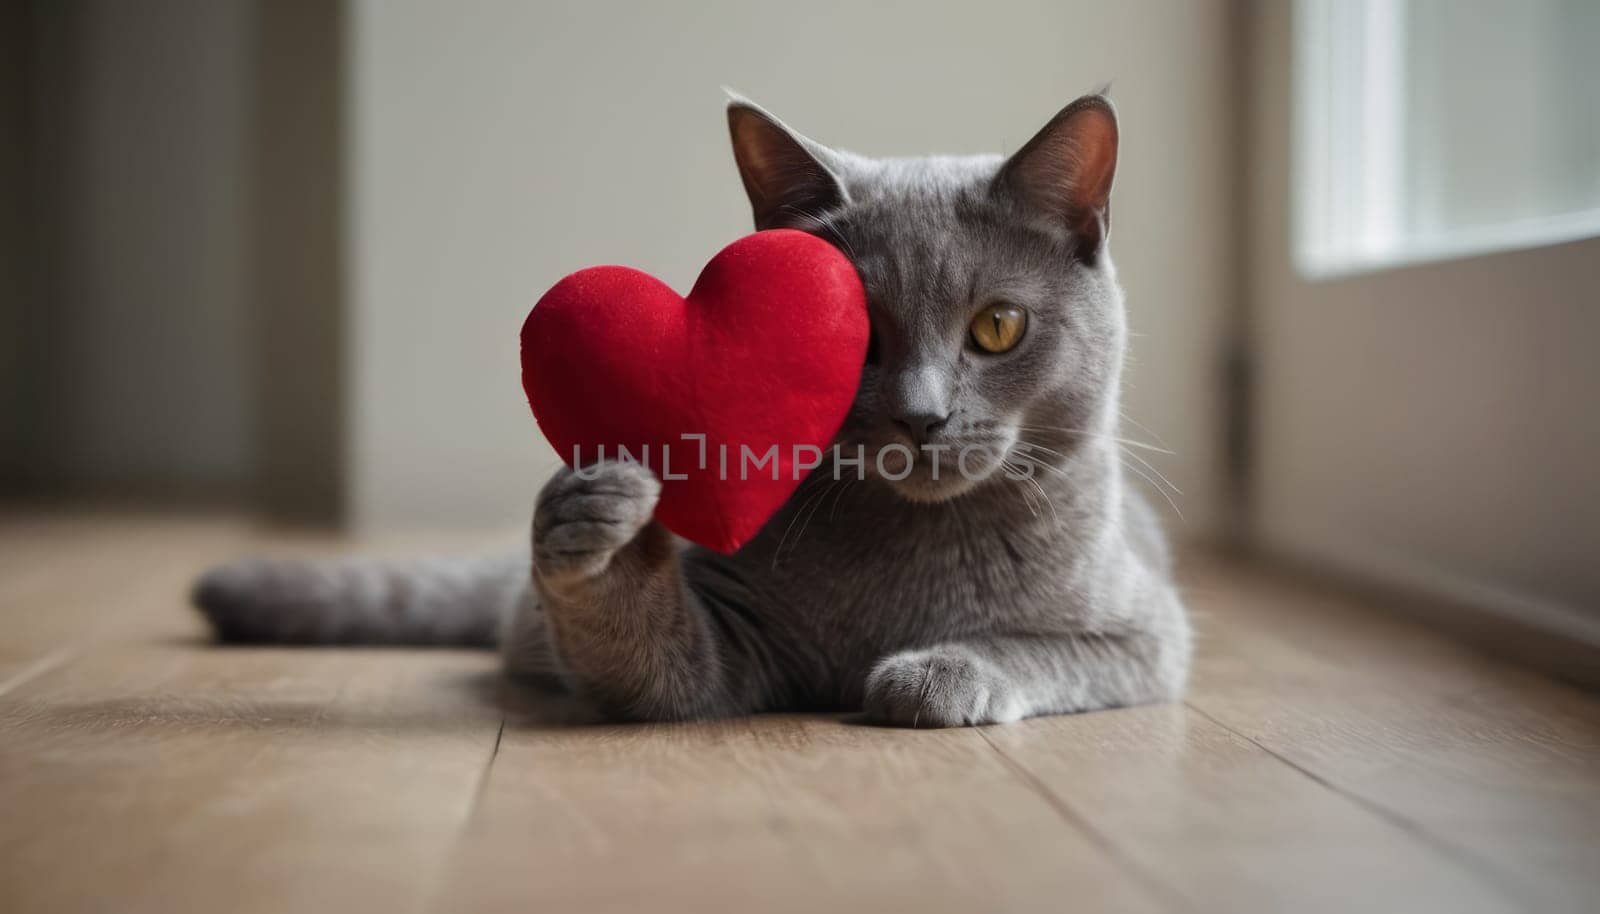 Grey Cat Holding Red Heart-shaped Object” by Andre1ns